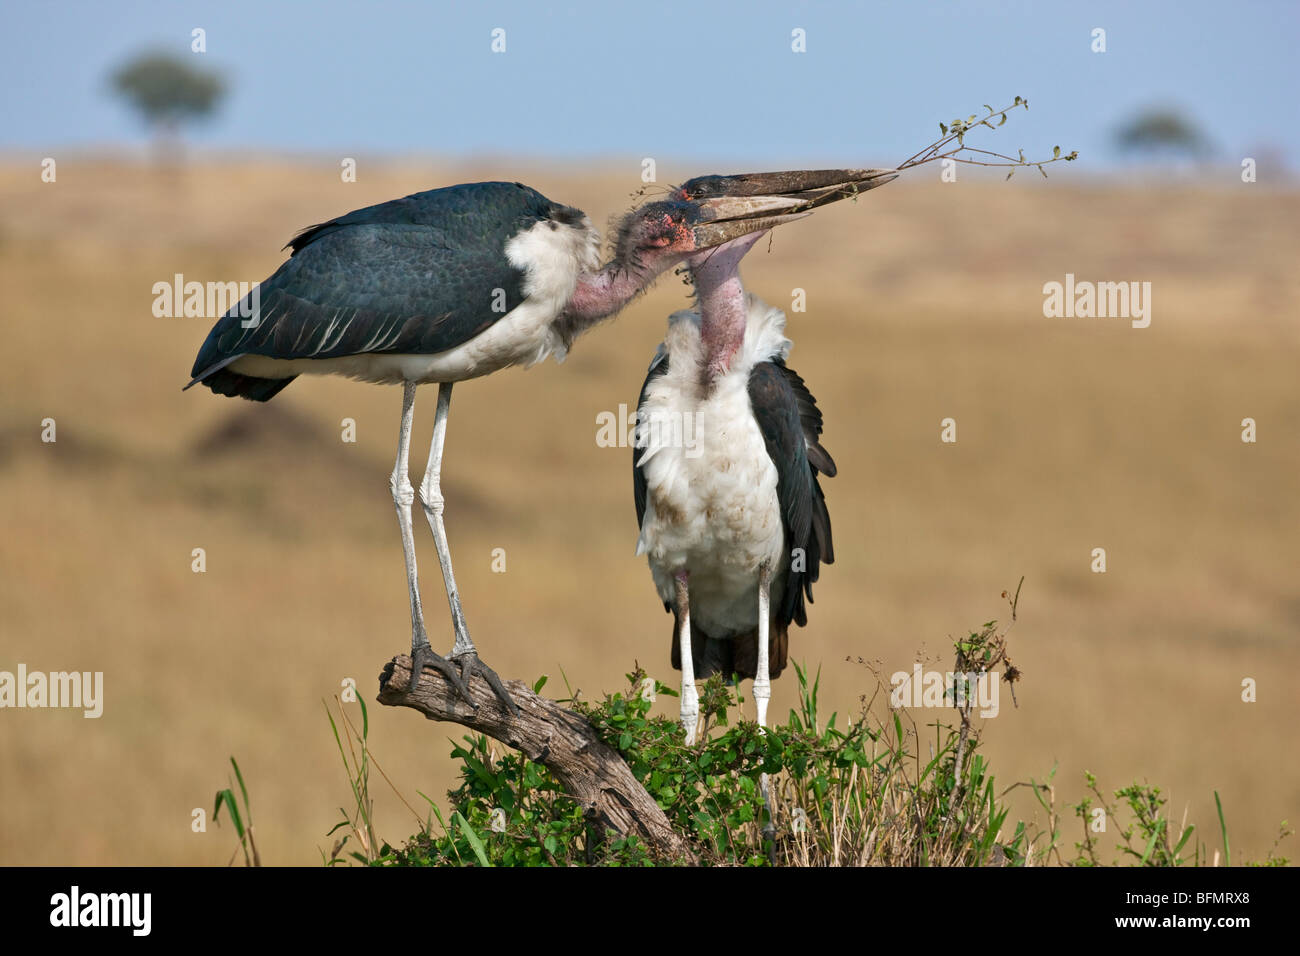 Kenya. A pair of marabou storks squabble over a twig to build a nest in Masai Mara National Reserve. Stock Photo